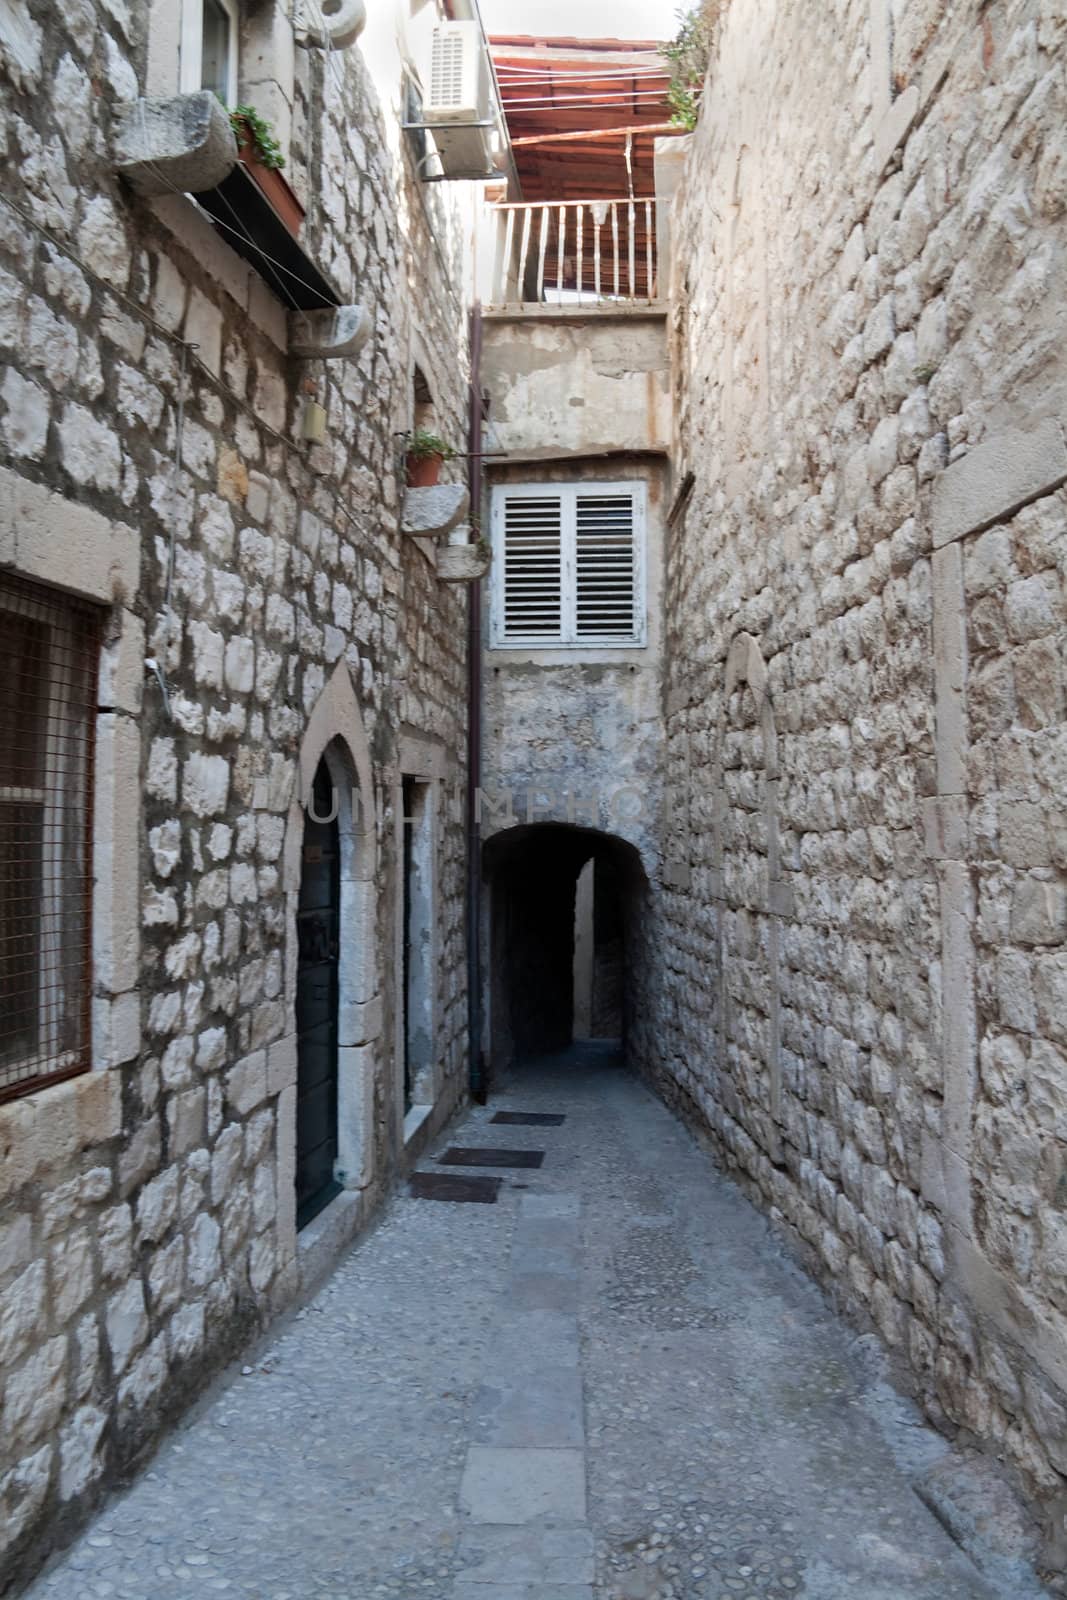 A empty alley way in an old European town